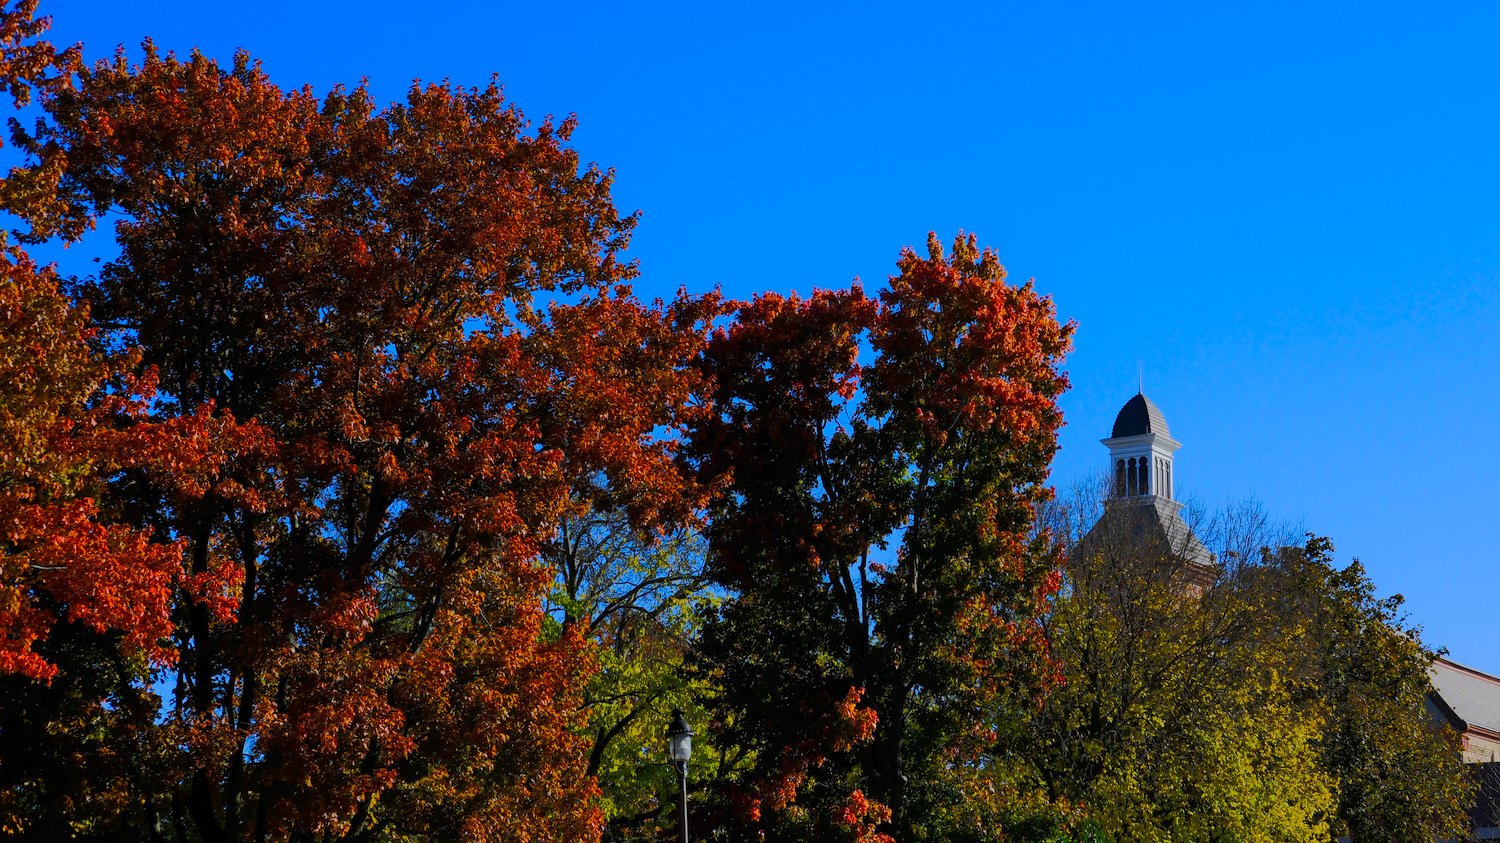 Steeple of the Woodstock Opera House and autumn leaves.